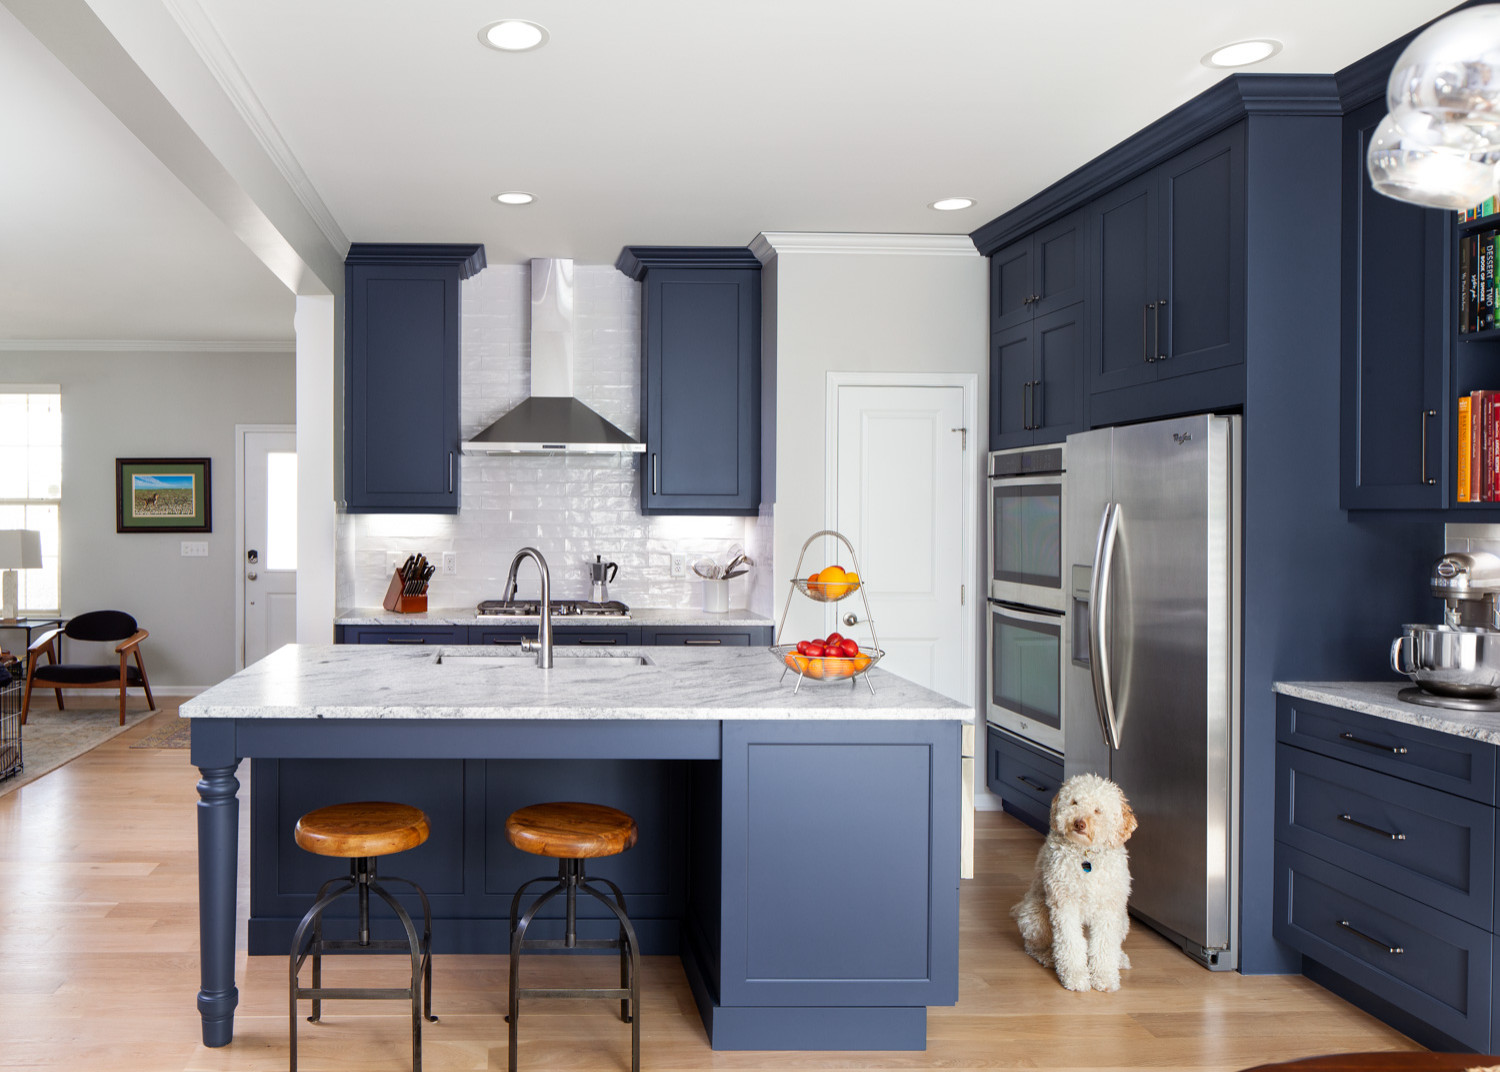 Brazingly Blue   Transitional   Kitchen   Raleigh   by Fresh Air ...